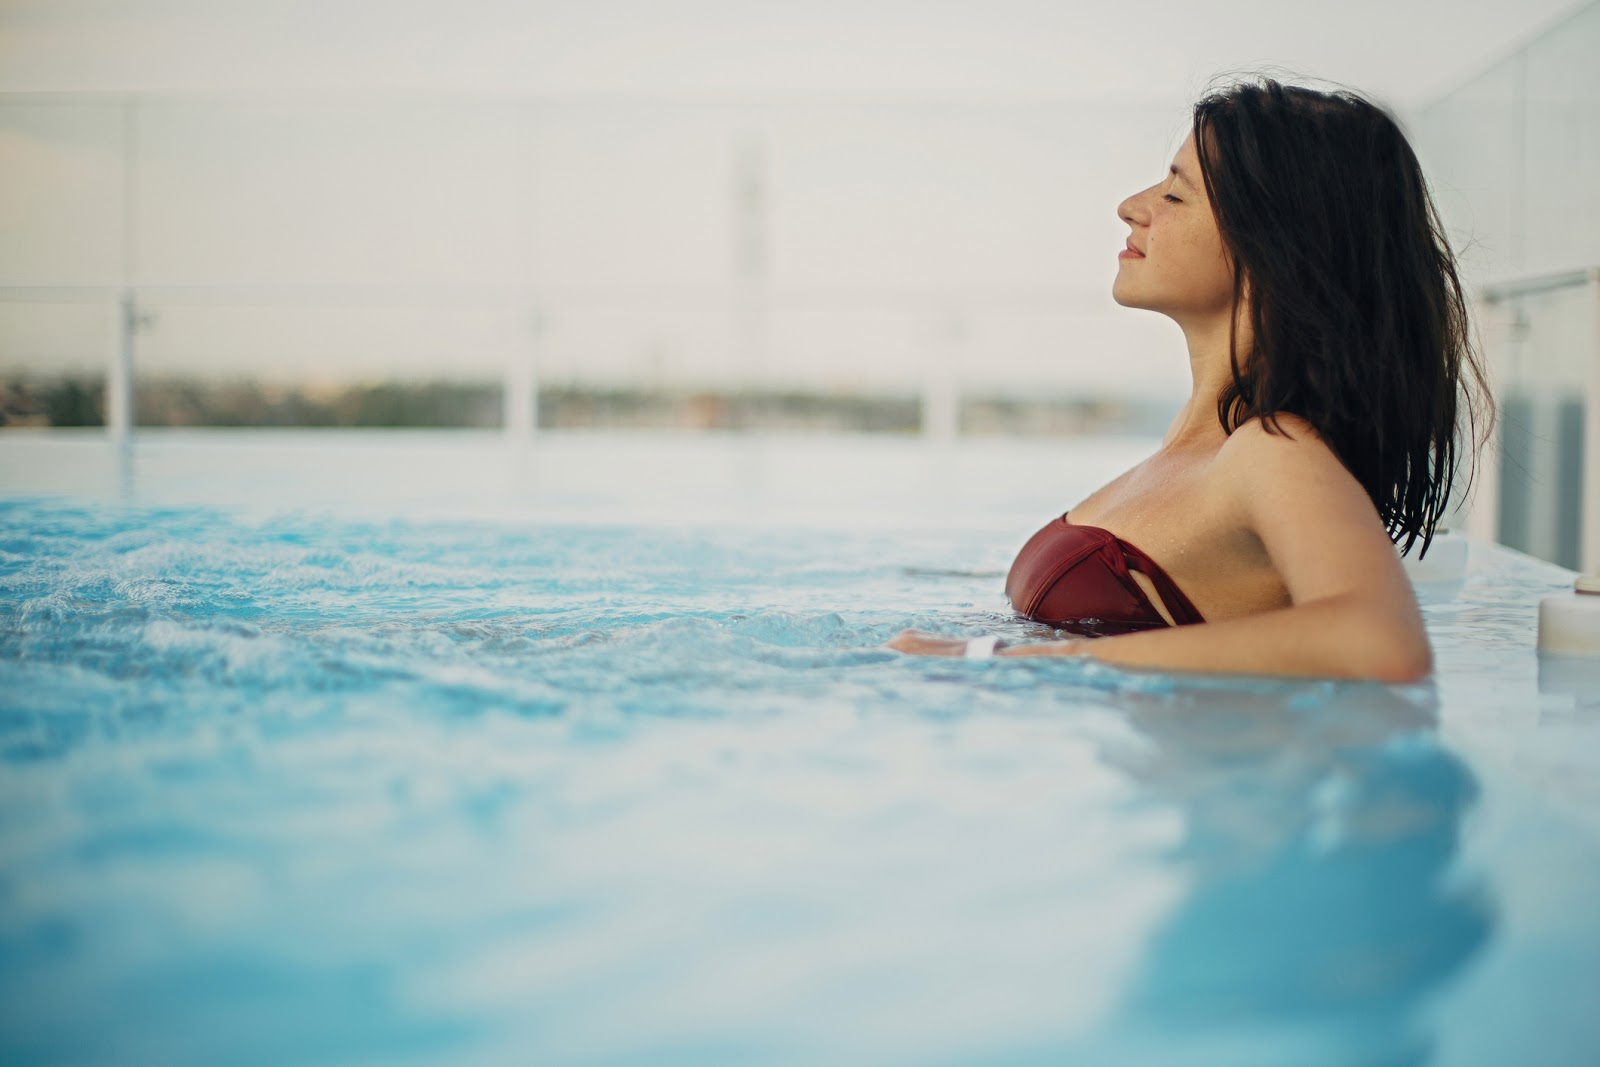 Young woman prioritizing her health and wellness in a pool